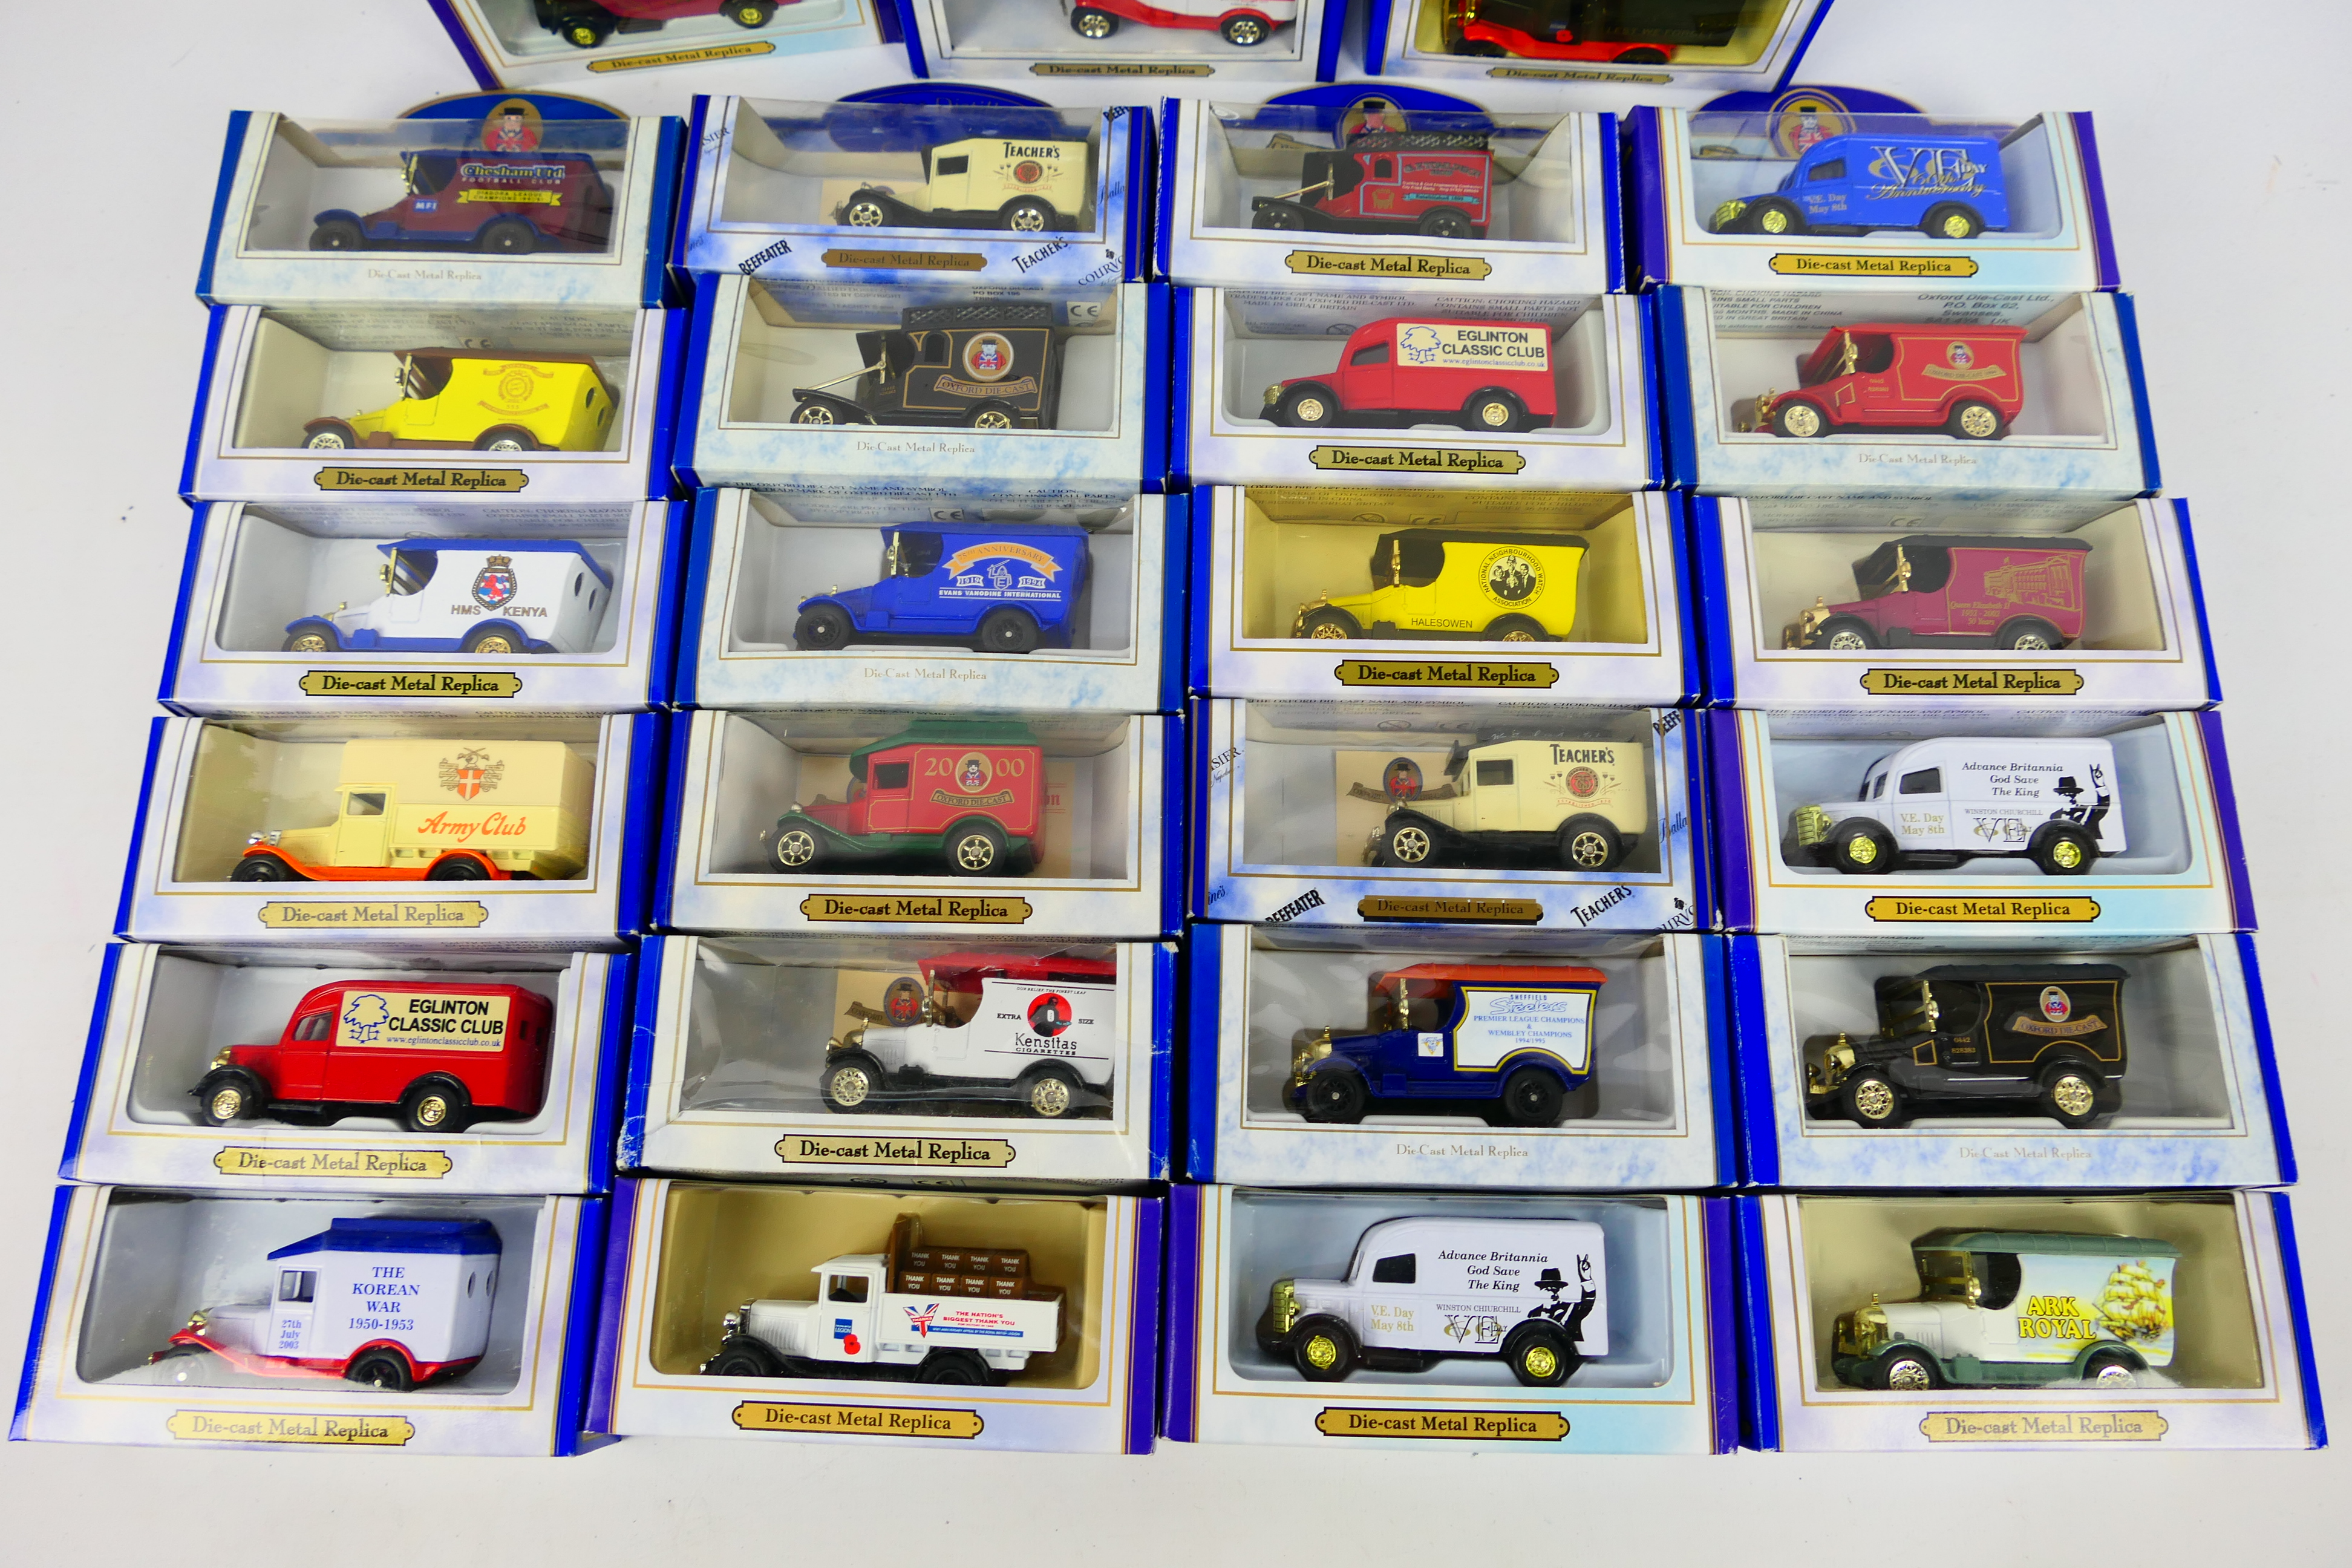 Oxford Diecast - A collection of 30 Oxford Diecast Metal replica vehicles including HMS Kenya, - Image 3 of 3